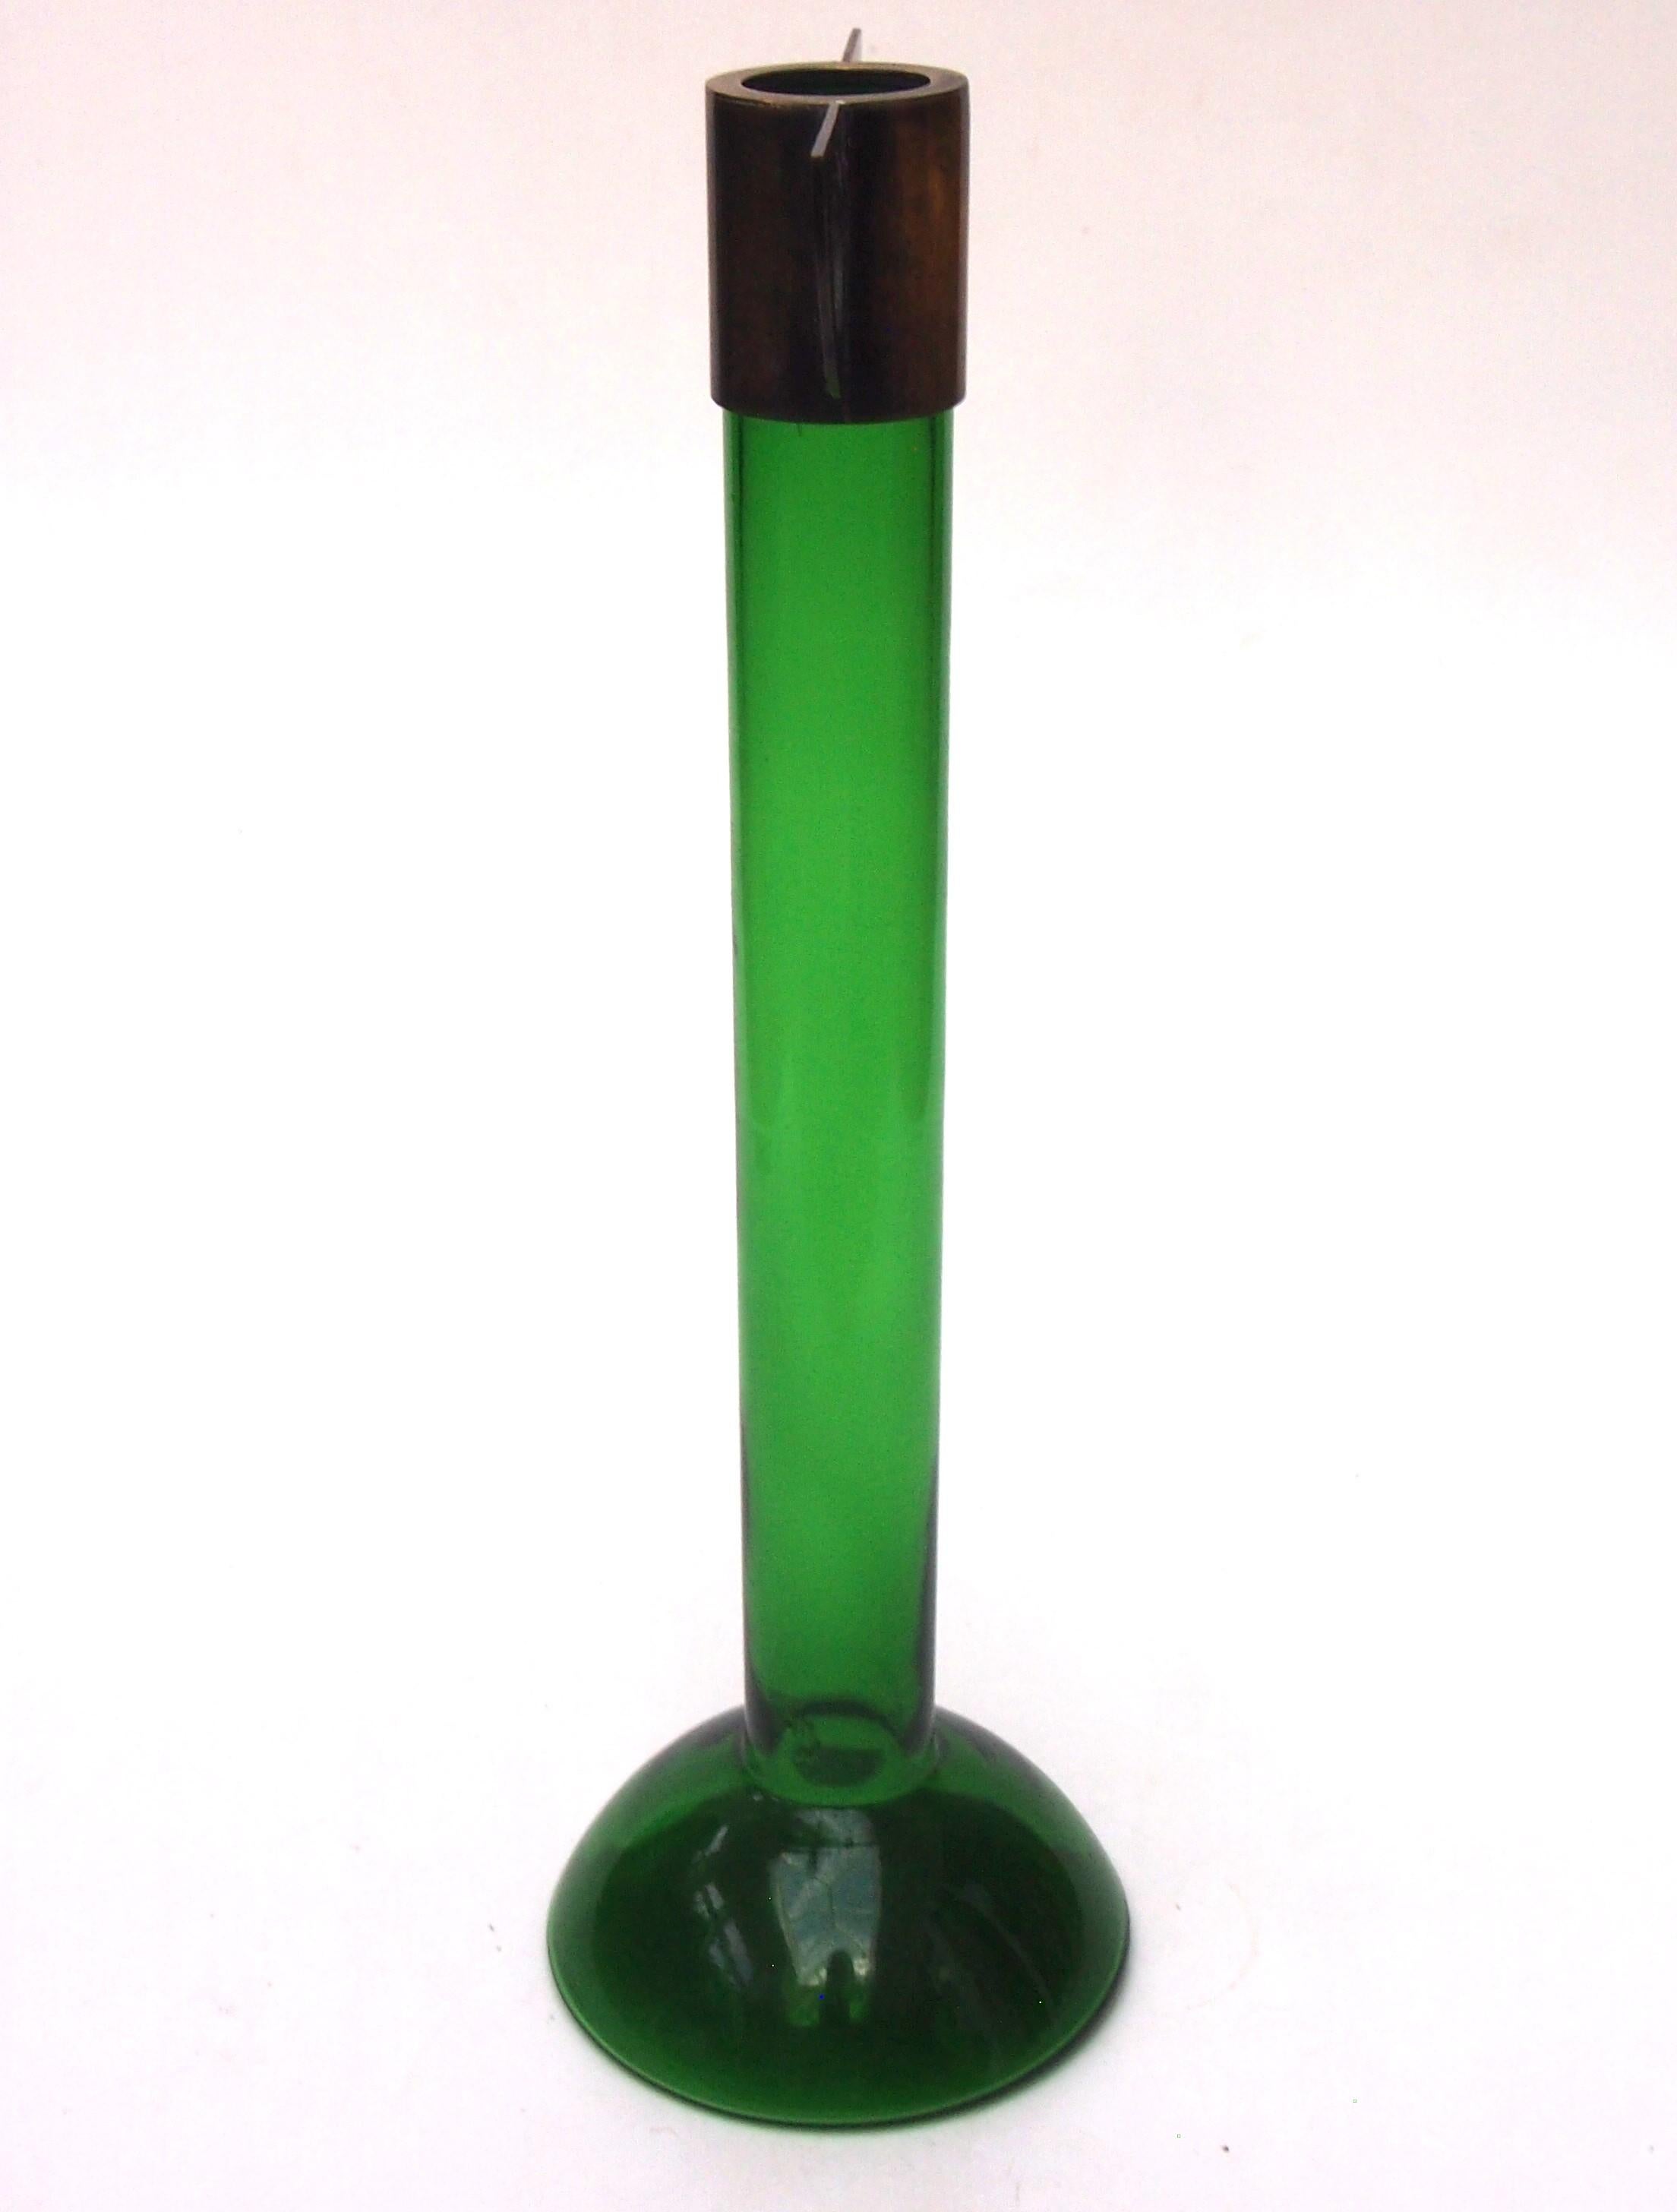 Striking tall thin green glass vase by Meyr's Neffe of Bohemian with a stylised metal top, winged by two quarter circle metal flanges decorated with large circular holes - balancing a wide domed circular glass base. A simple but very effective and